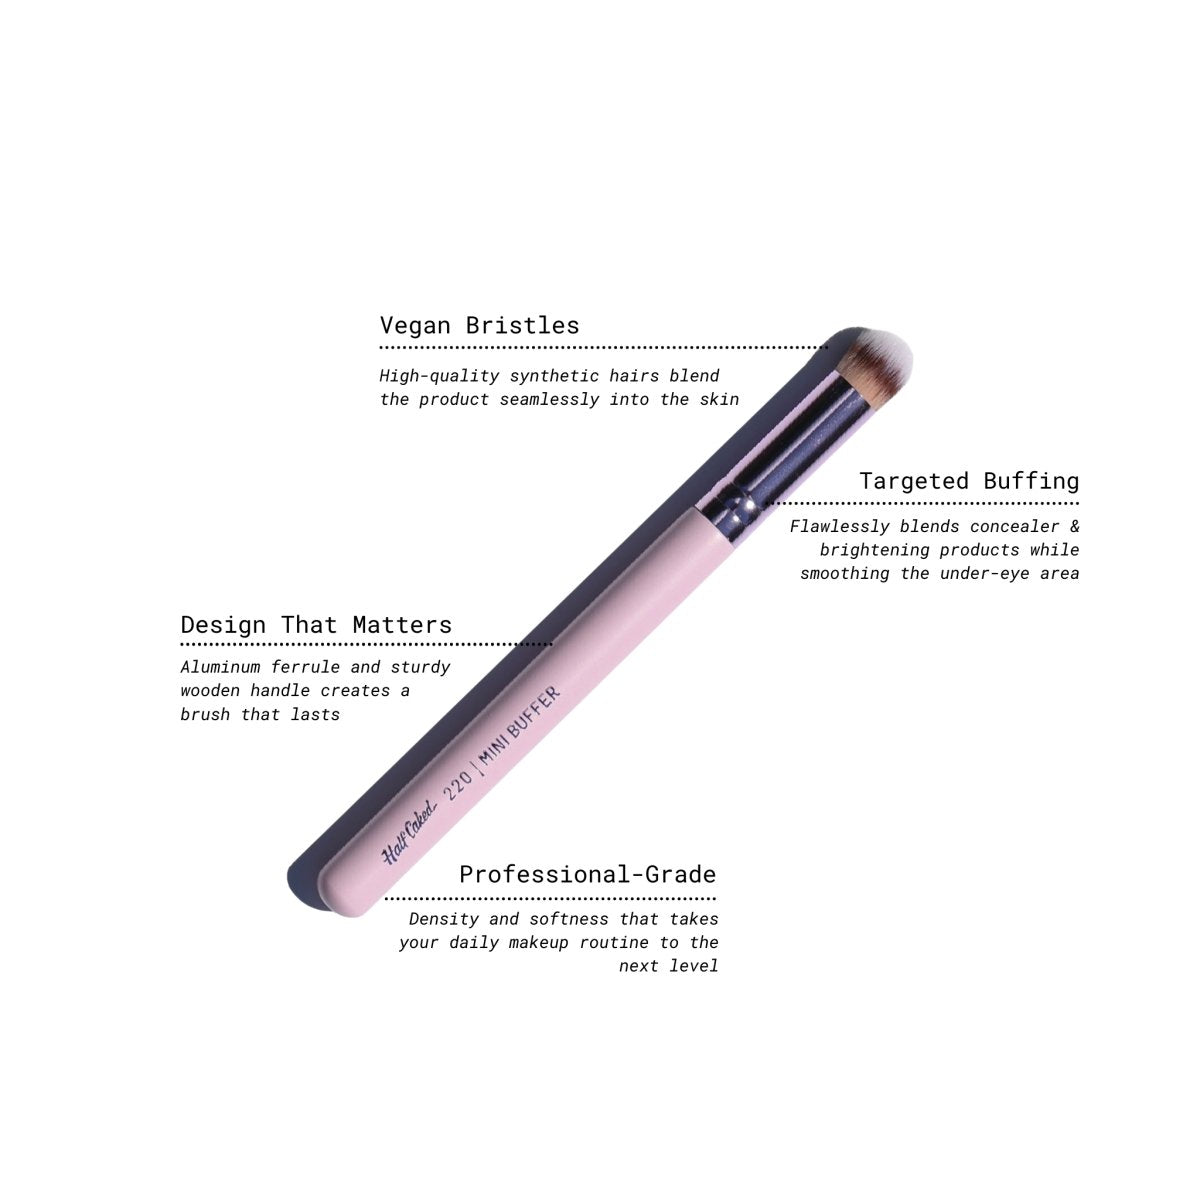 shiny purple concealer brush with tan brown and white hairs - Mini Buffer Brush - Half Caked